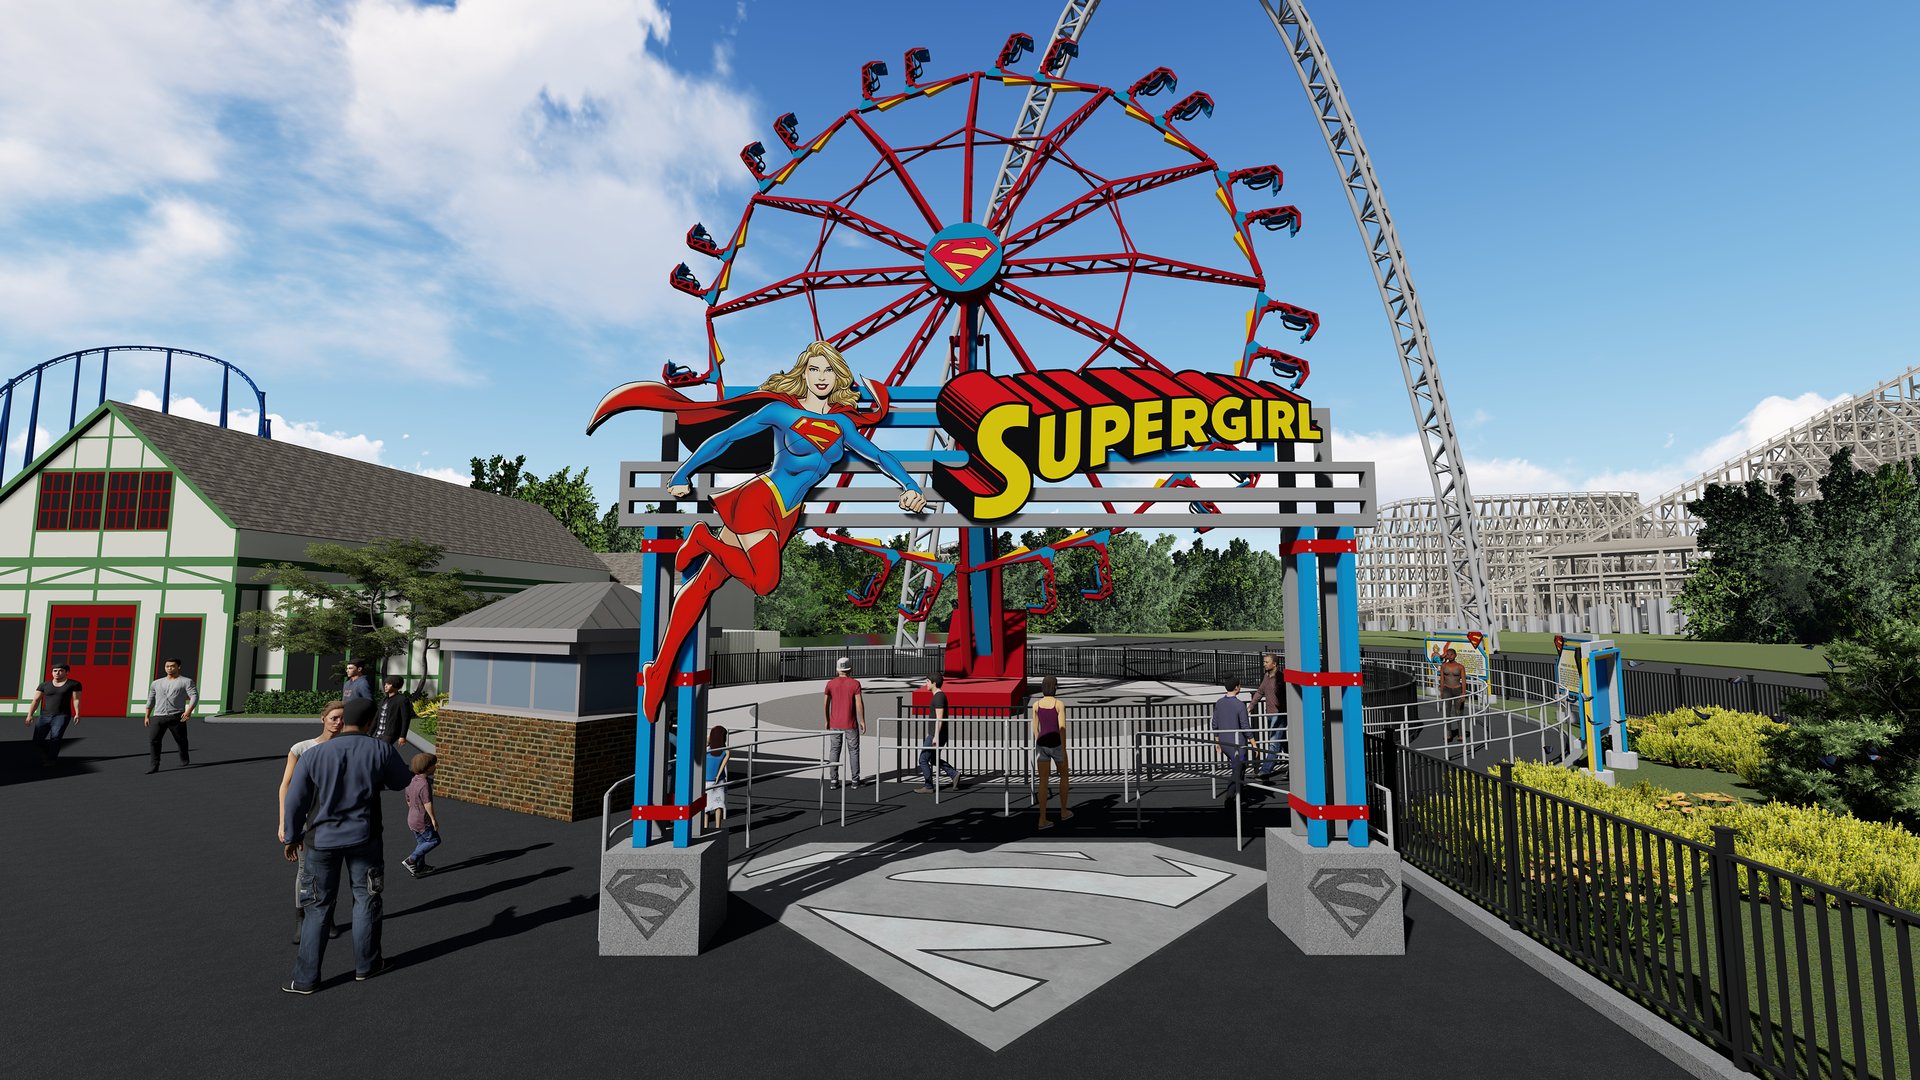 New Flat Rides Coming To Six Flags St. Louis and Darien Lake - Coaster101